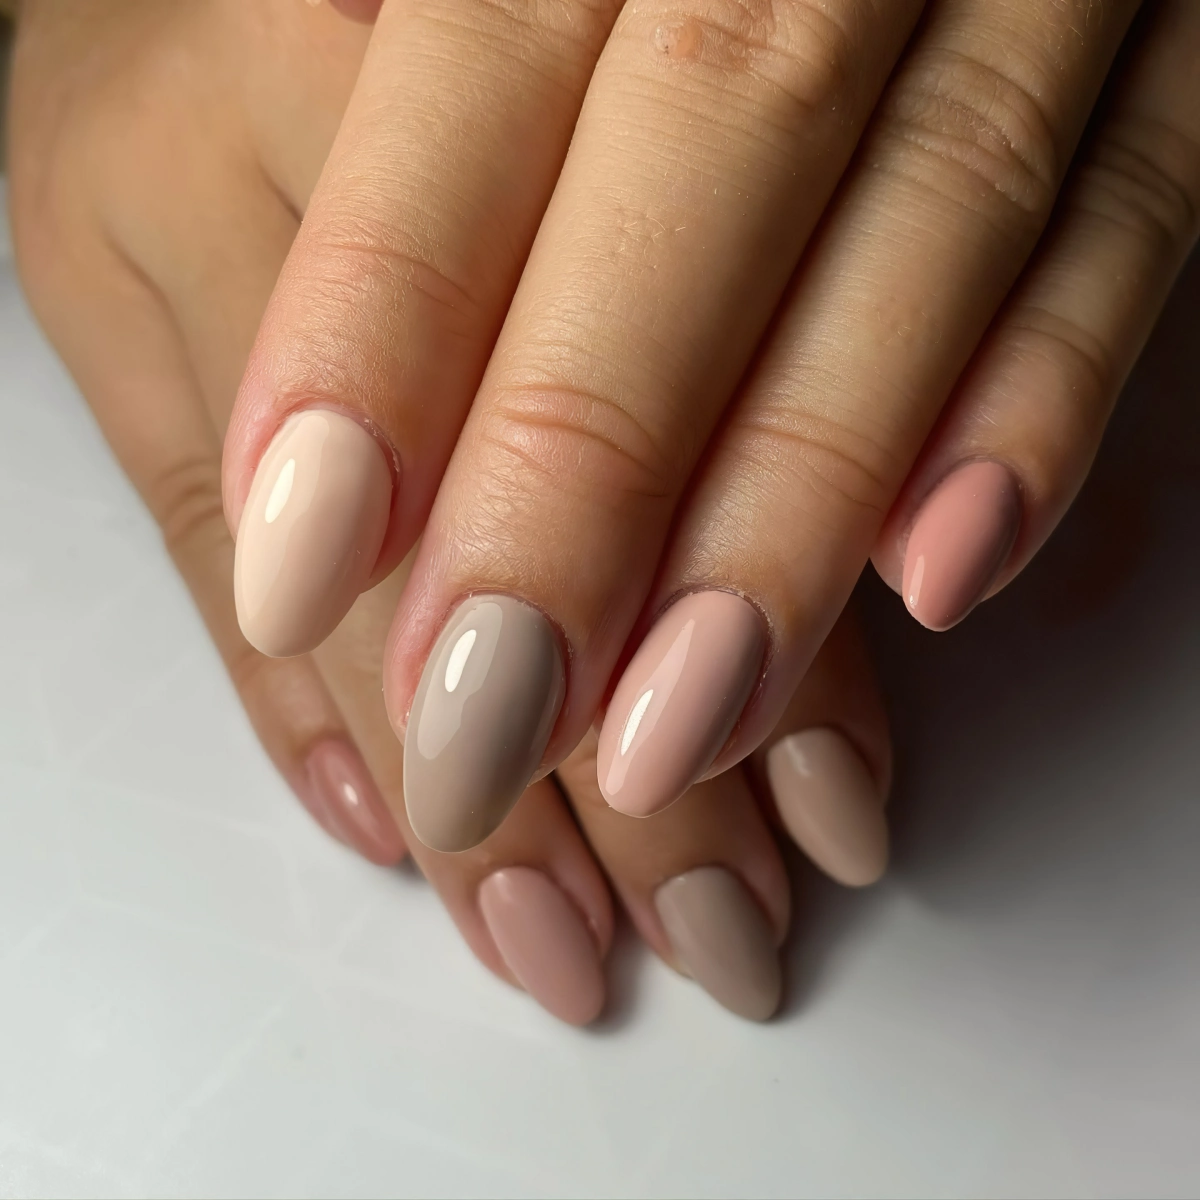 manucure ongles couleurs differentes vernis base milky rose blanc